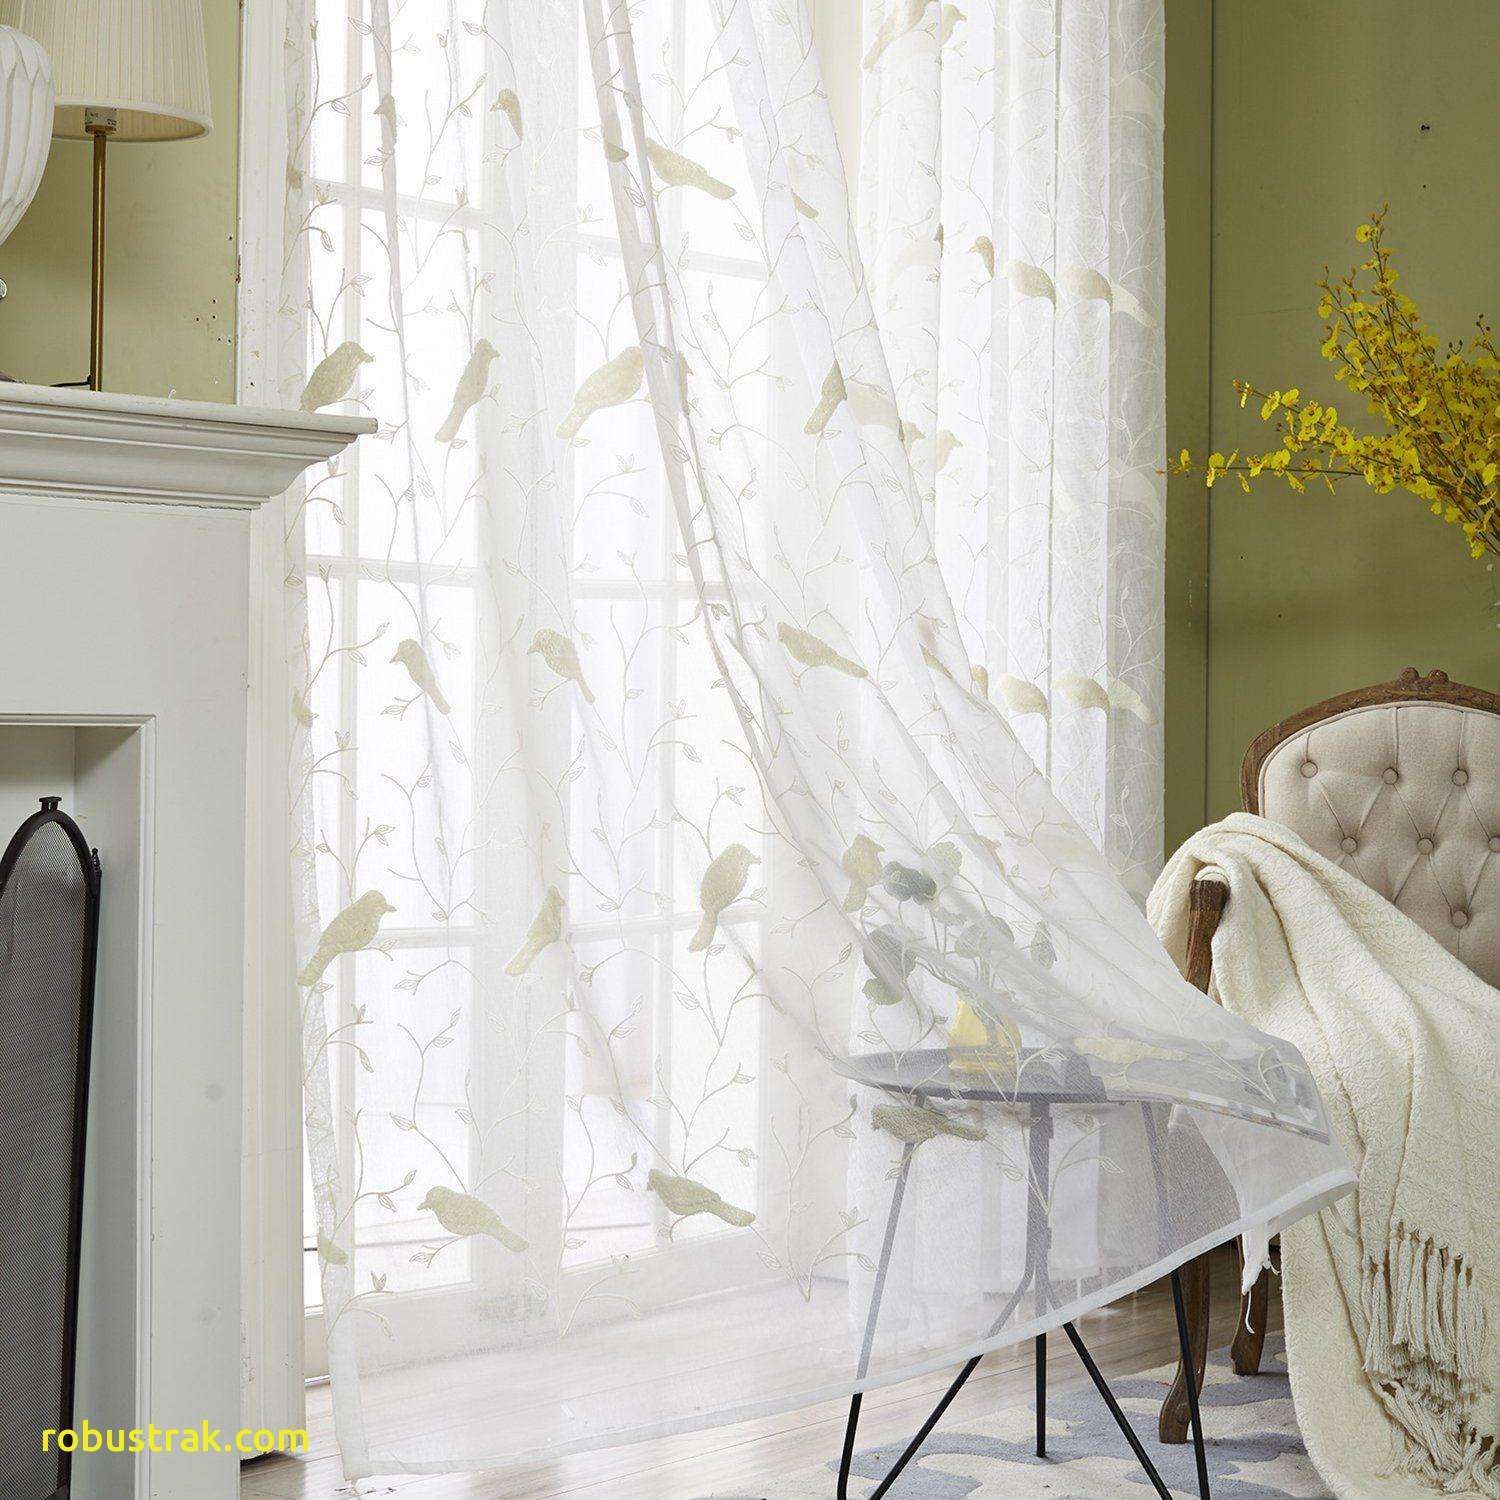 Light Avian Curtains | Window Treatments In 2019 | Sheer For White Knit Lace Bird Motif Window Curtain Tiers (View 10 of 20)